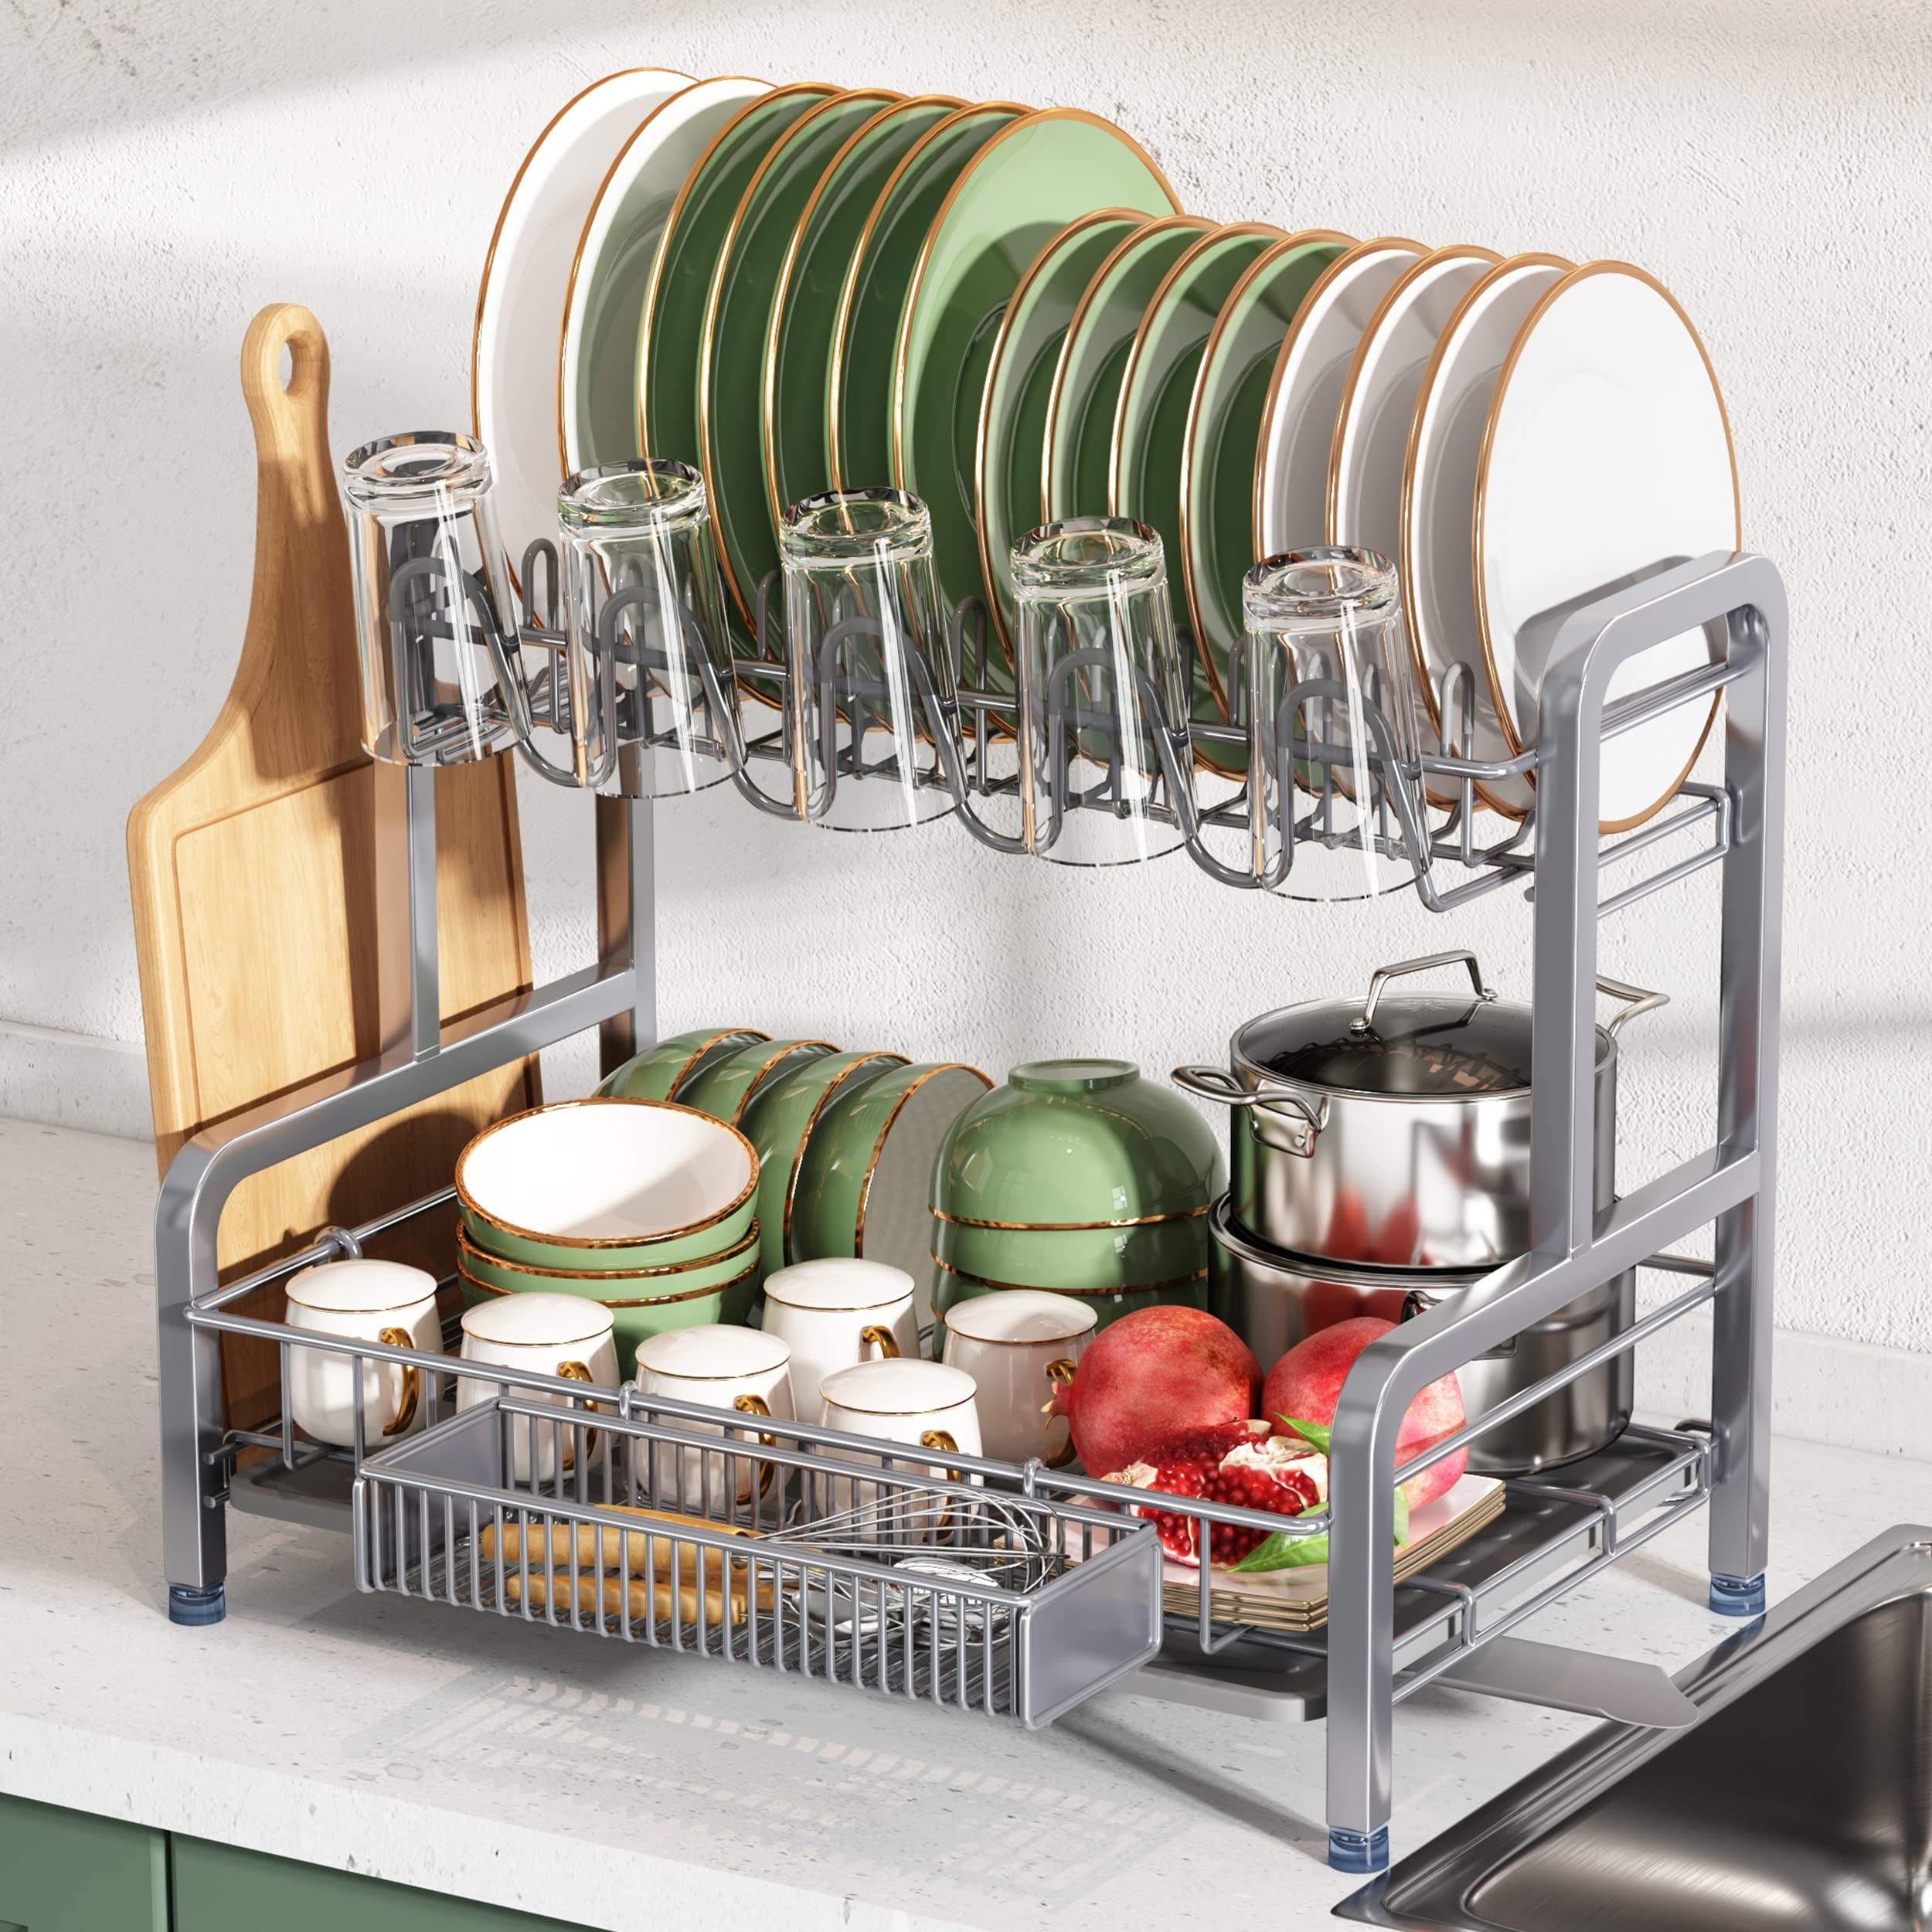 romision Over The Sink Dish Drying Rack, 2-Tier Adjustable  Length(33.5-36.2in) Stainless Steel Dish Rack Over Sink, Expandable Large  Dish Drainer for